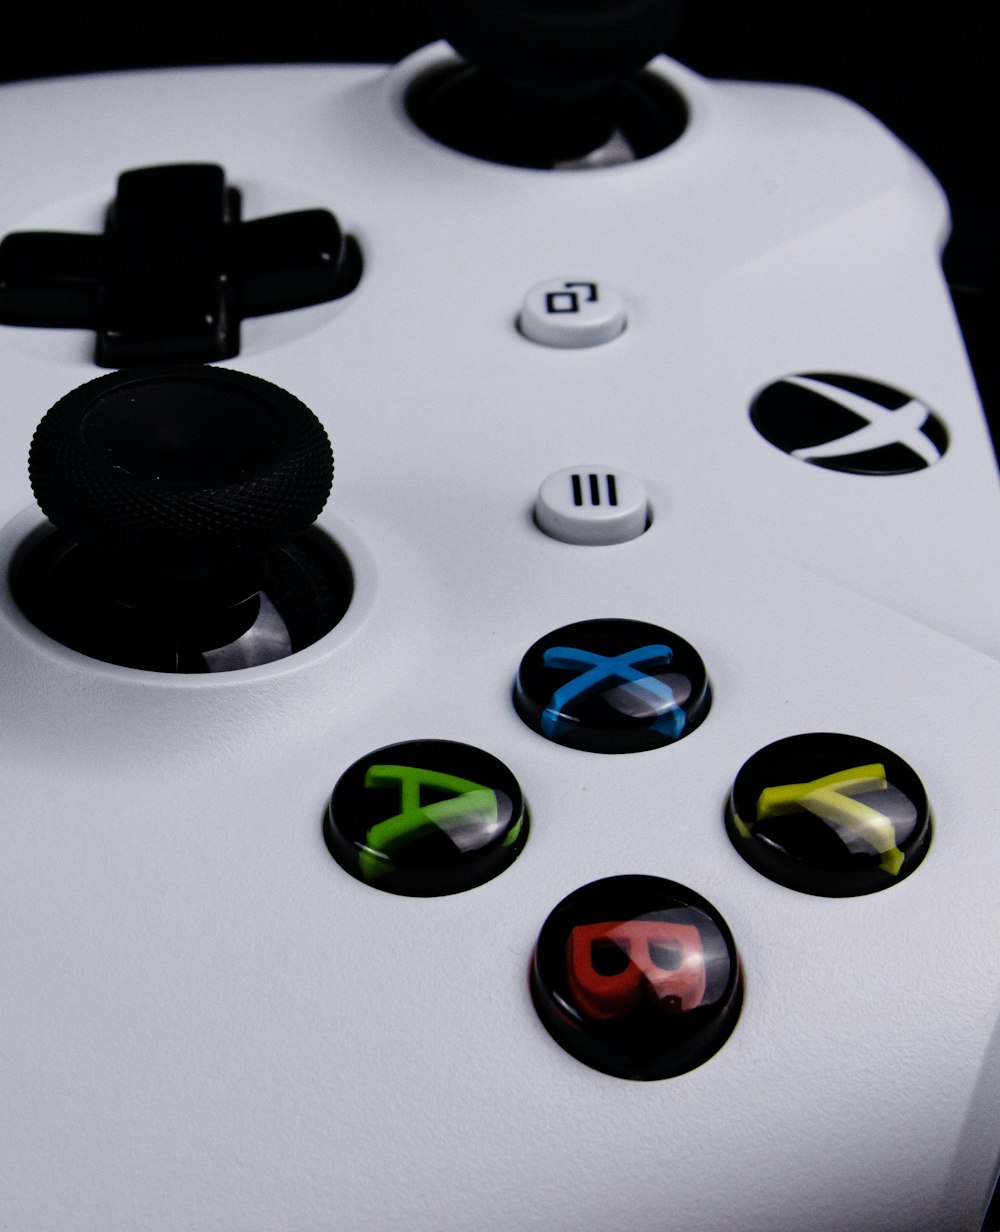 White xbox game controller with buttons photo – Free Xbox Image on Unsplash